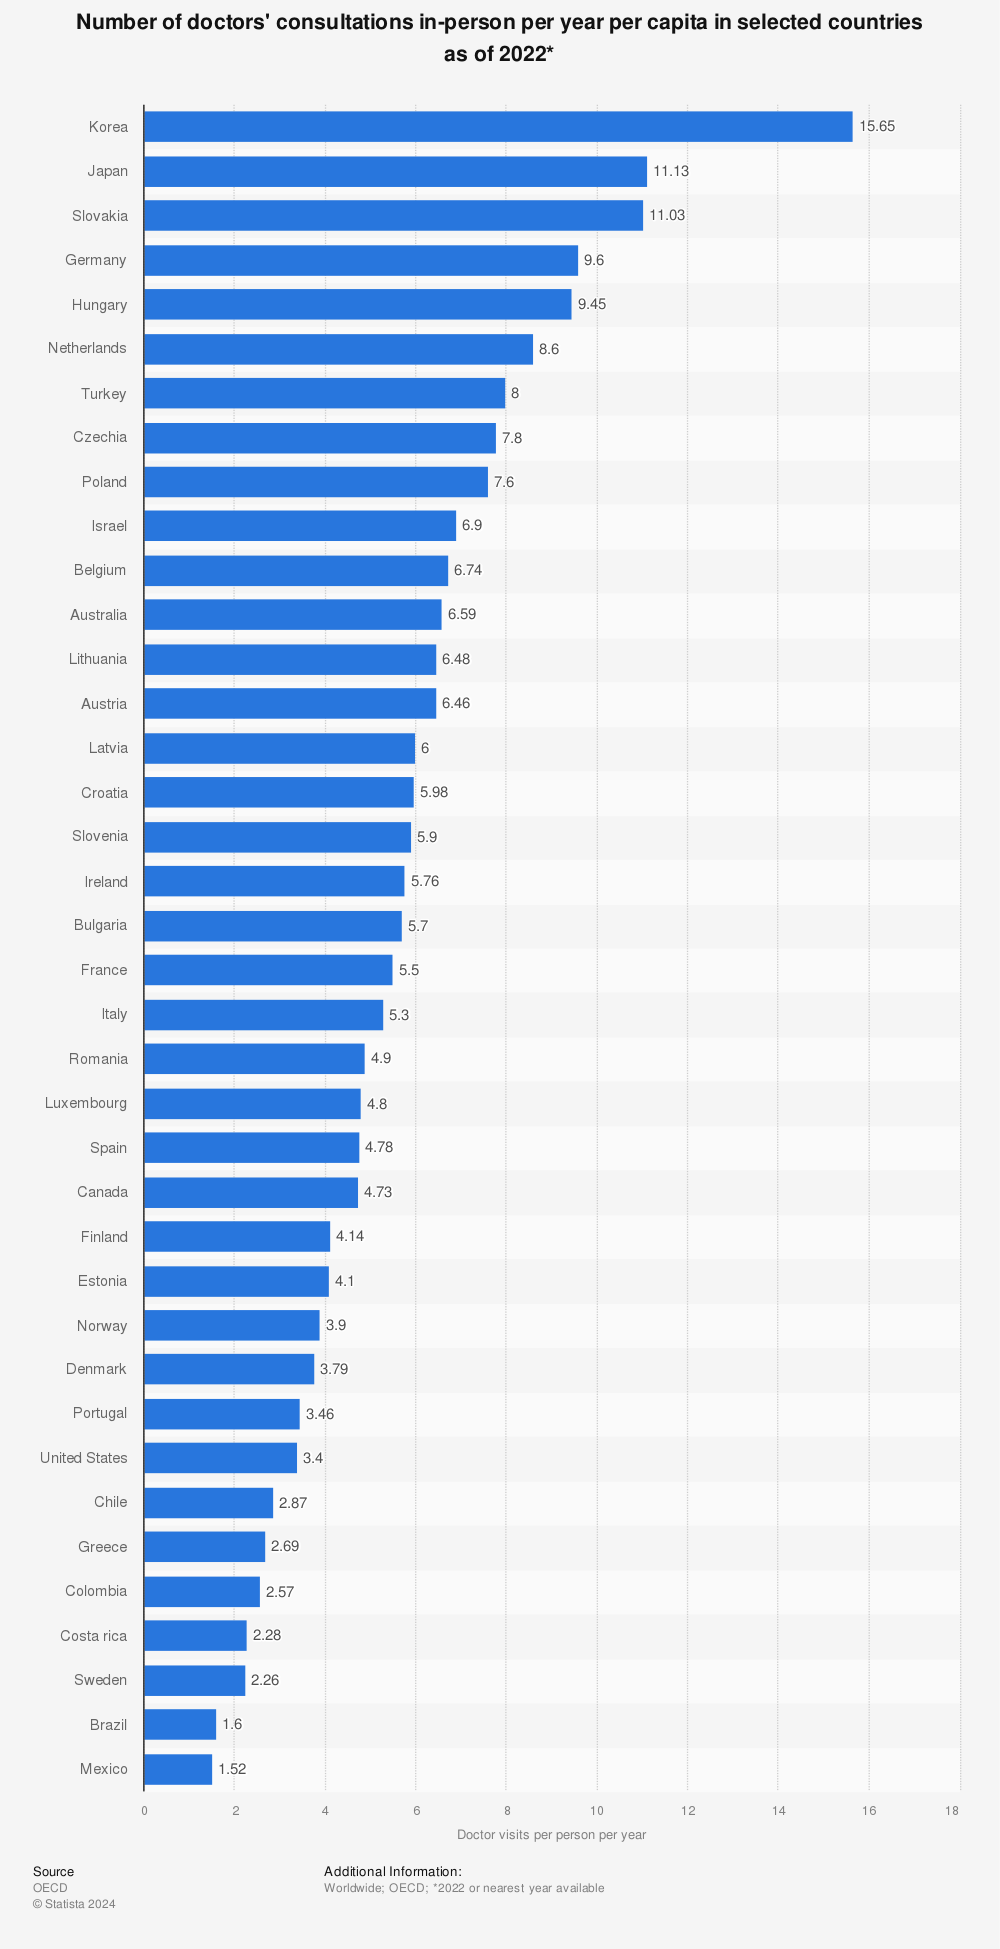 Statistic: Number of doctor visits per capita in selected countries as of 2019 | Statista